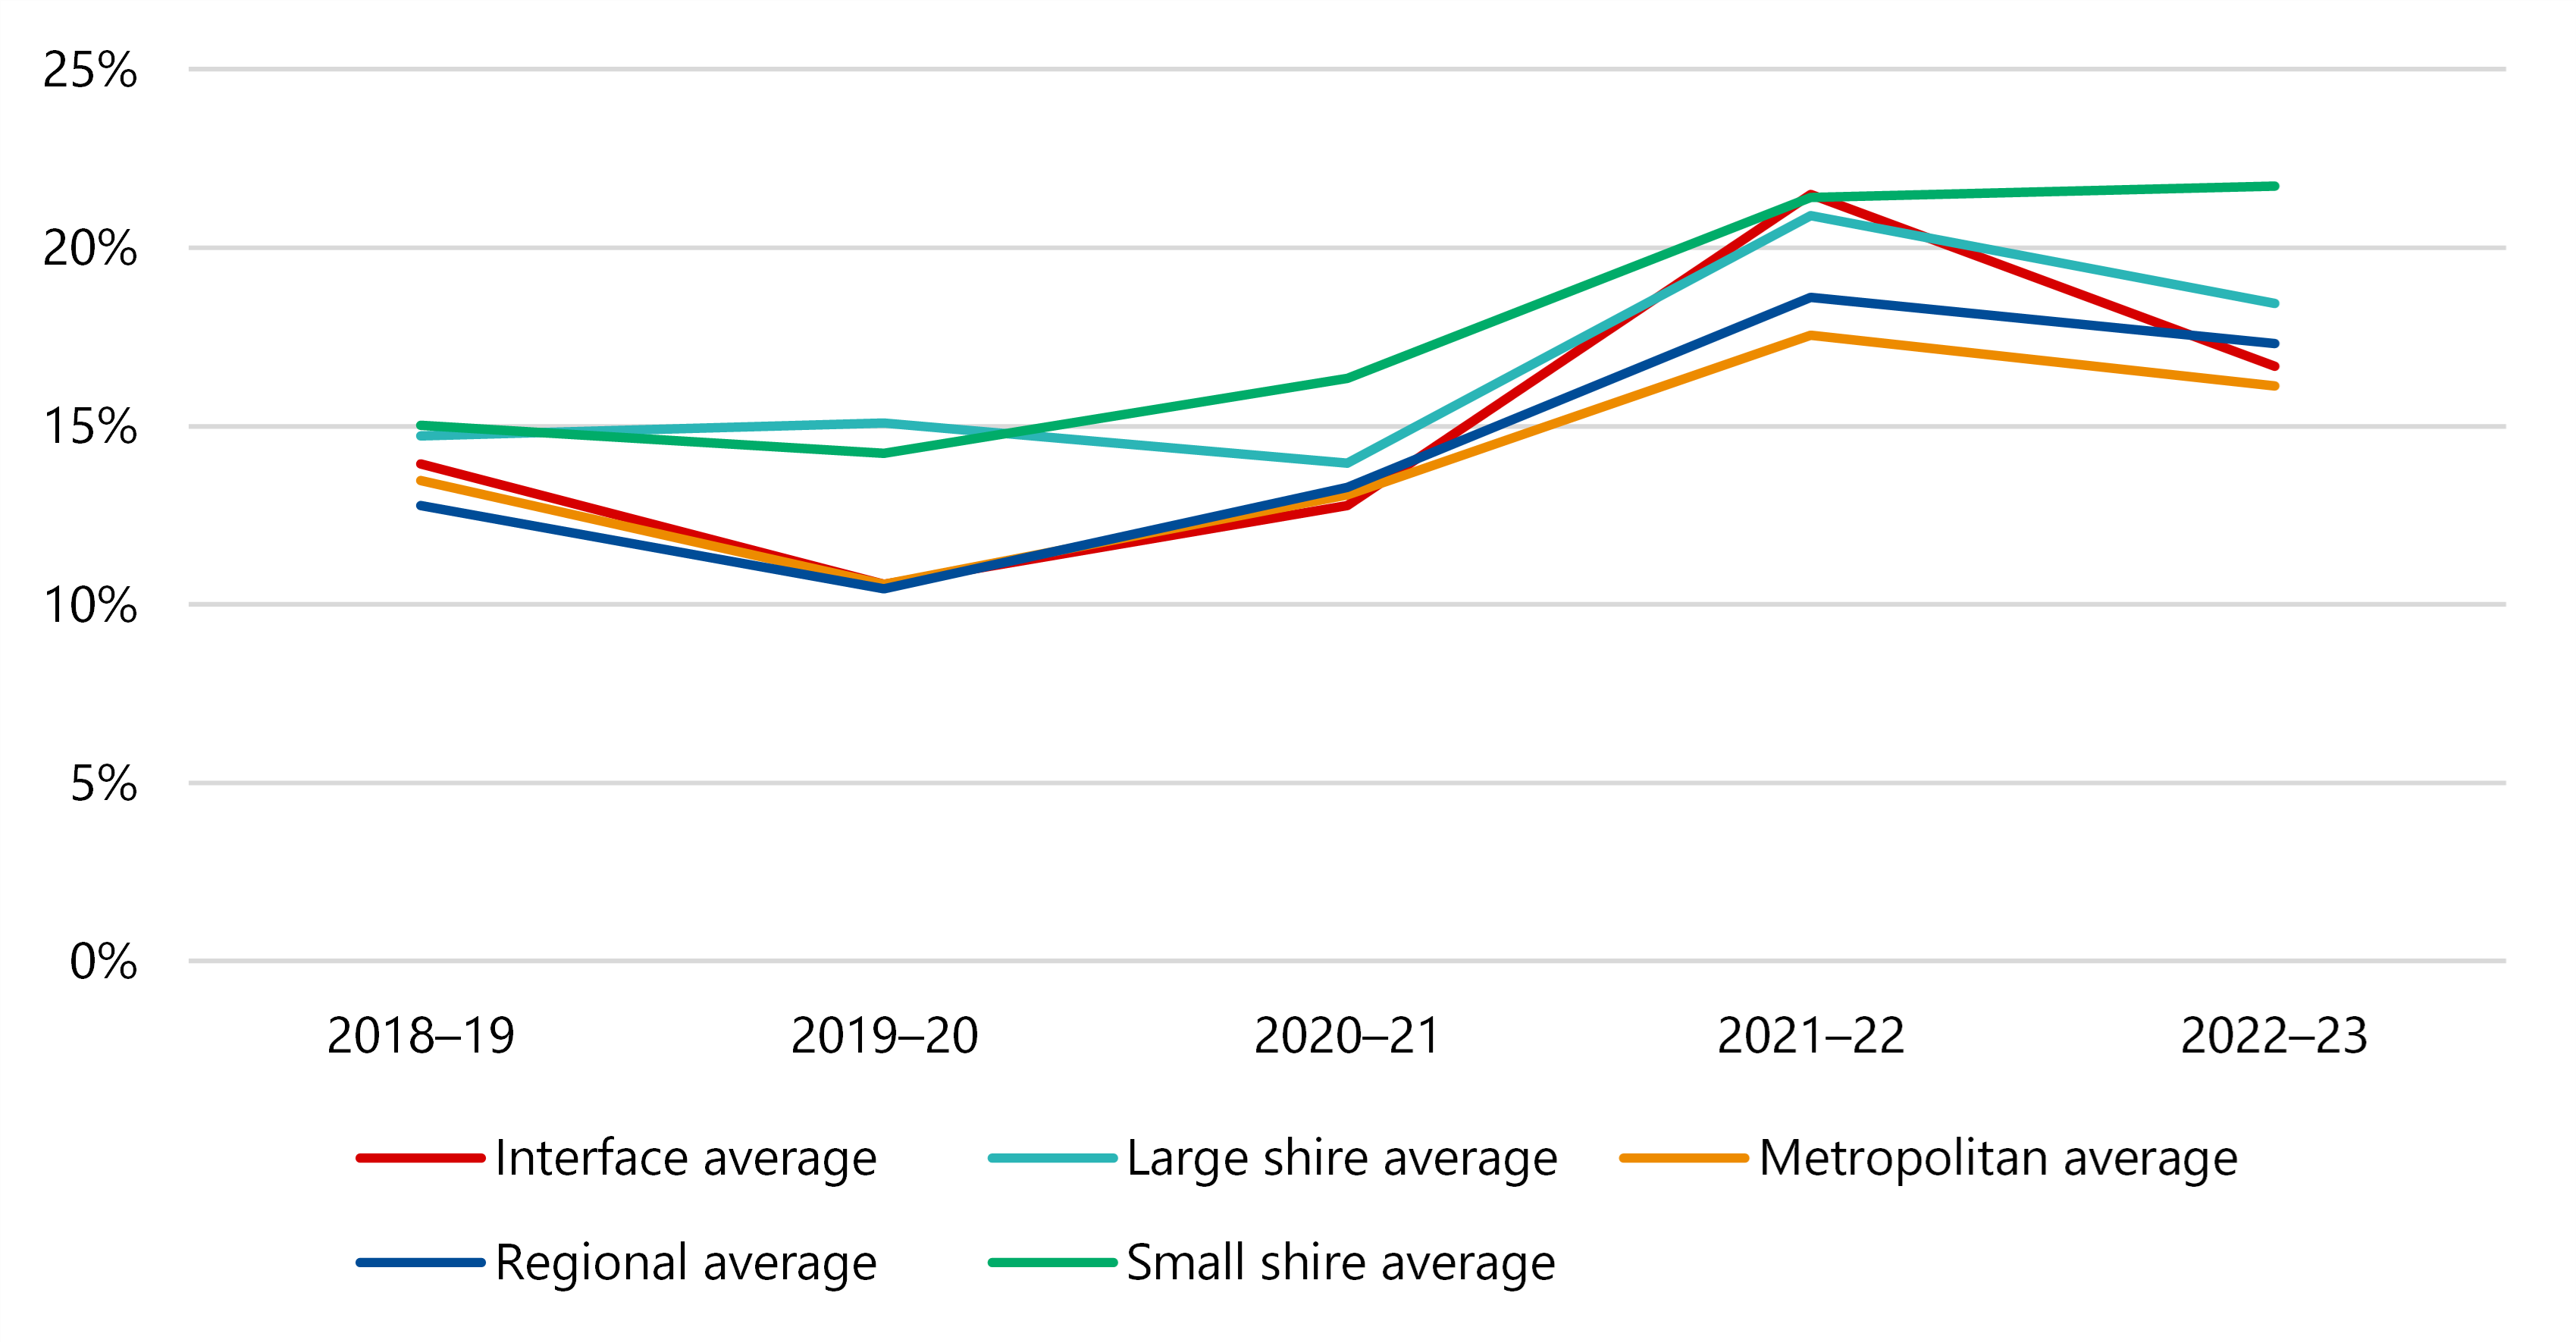 Figure 2 is a line graph showing that, for urban council cohorts, staff turnover dropped from around 12–15% in 2018–19 to just over 10% in 2019–20, but stayed steady for large and small shire councils. It rose for all cohorts except large shire councils in 2020–21, to between about 13% and 17%, then rose for all cohorts in 2021–22, to between about 17% and 21%. In 2022–23, staff turnover rose slightly to around 22% for small shire councils, but dropped for all other cohorts, to around 16% to 18%. The drop was greatest for interface councils, from about 22% to about 17%.